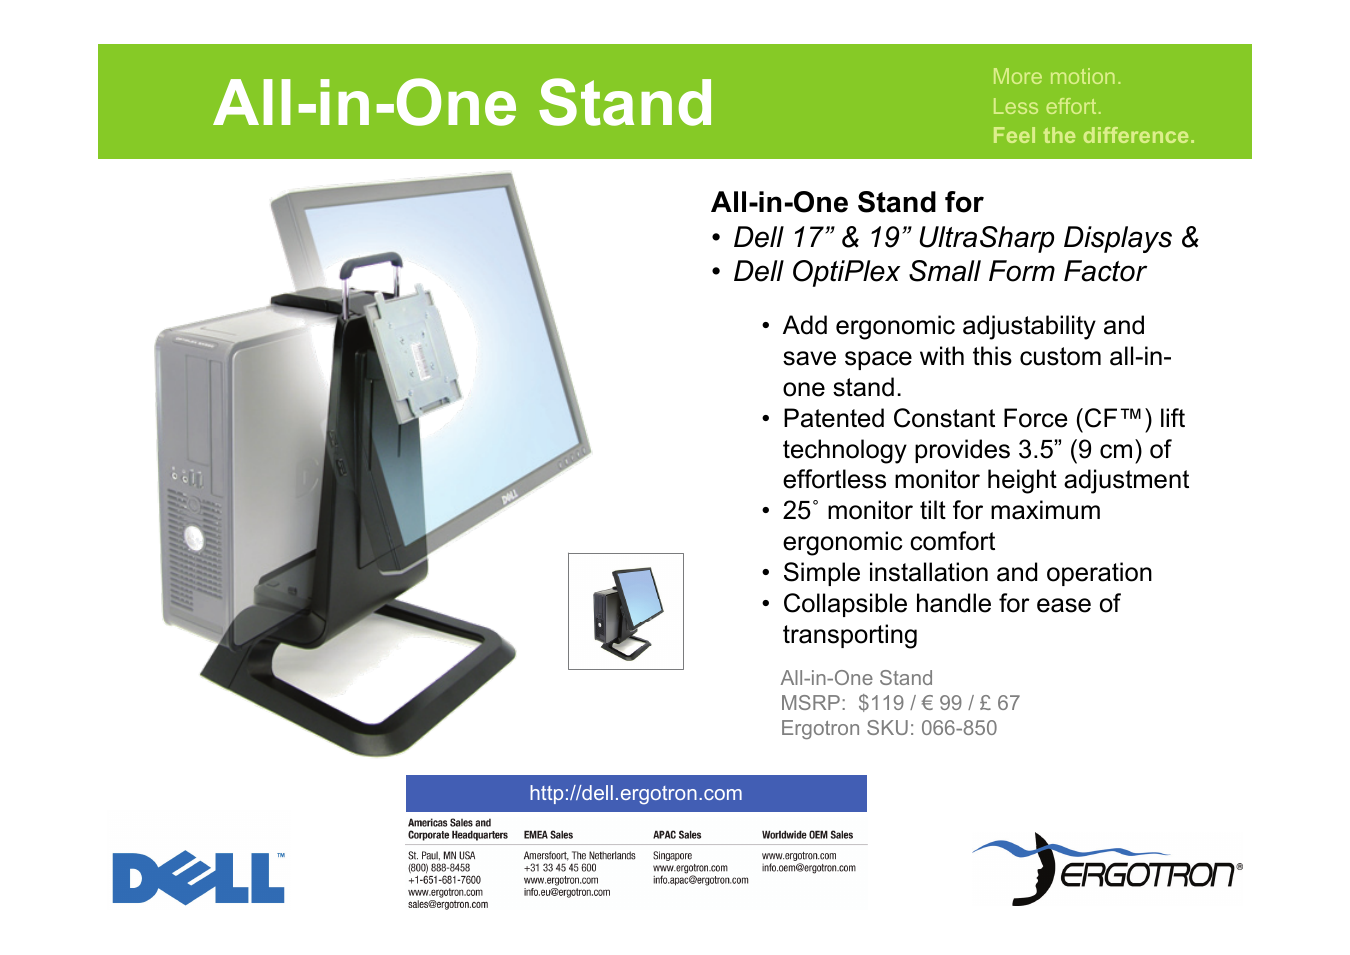 All-in-One Stand